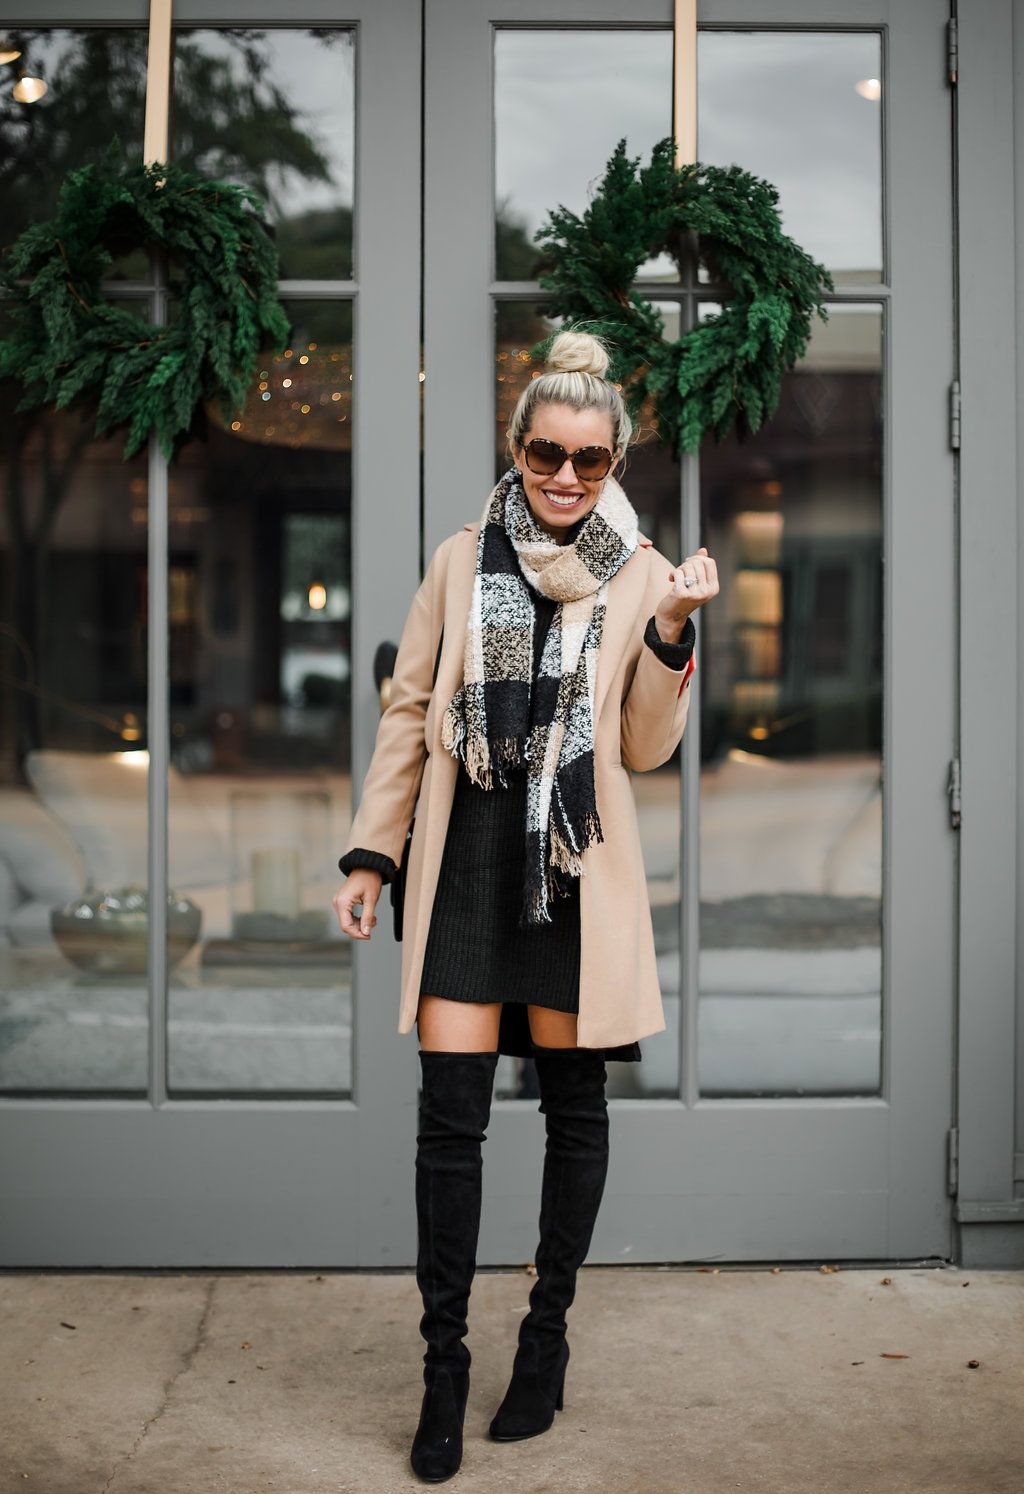 How to Wear Short Dresses in Winter to Stay Warm and Stylish